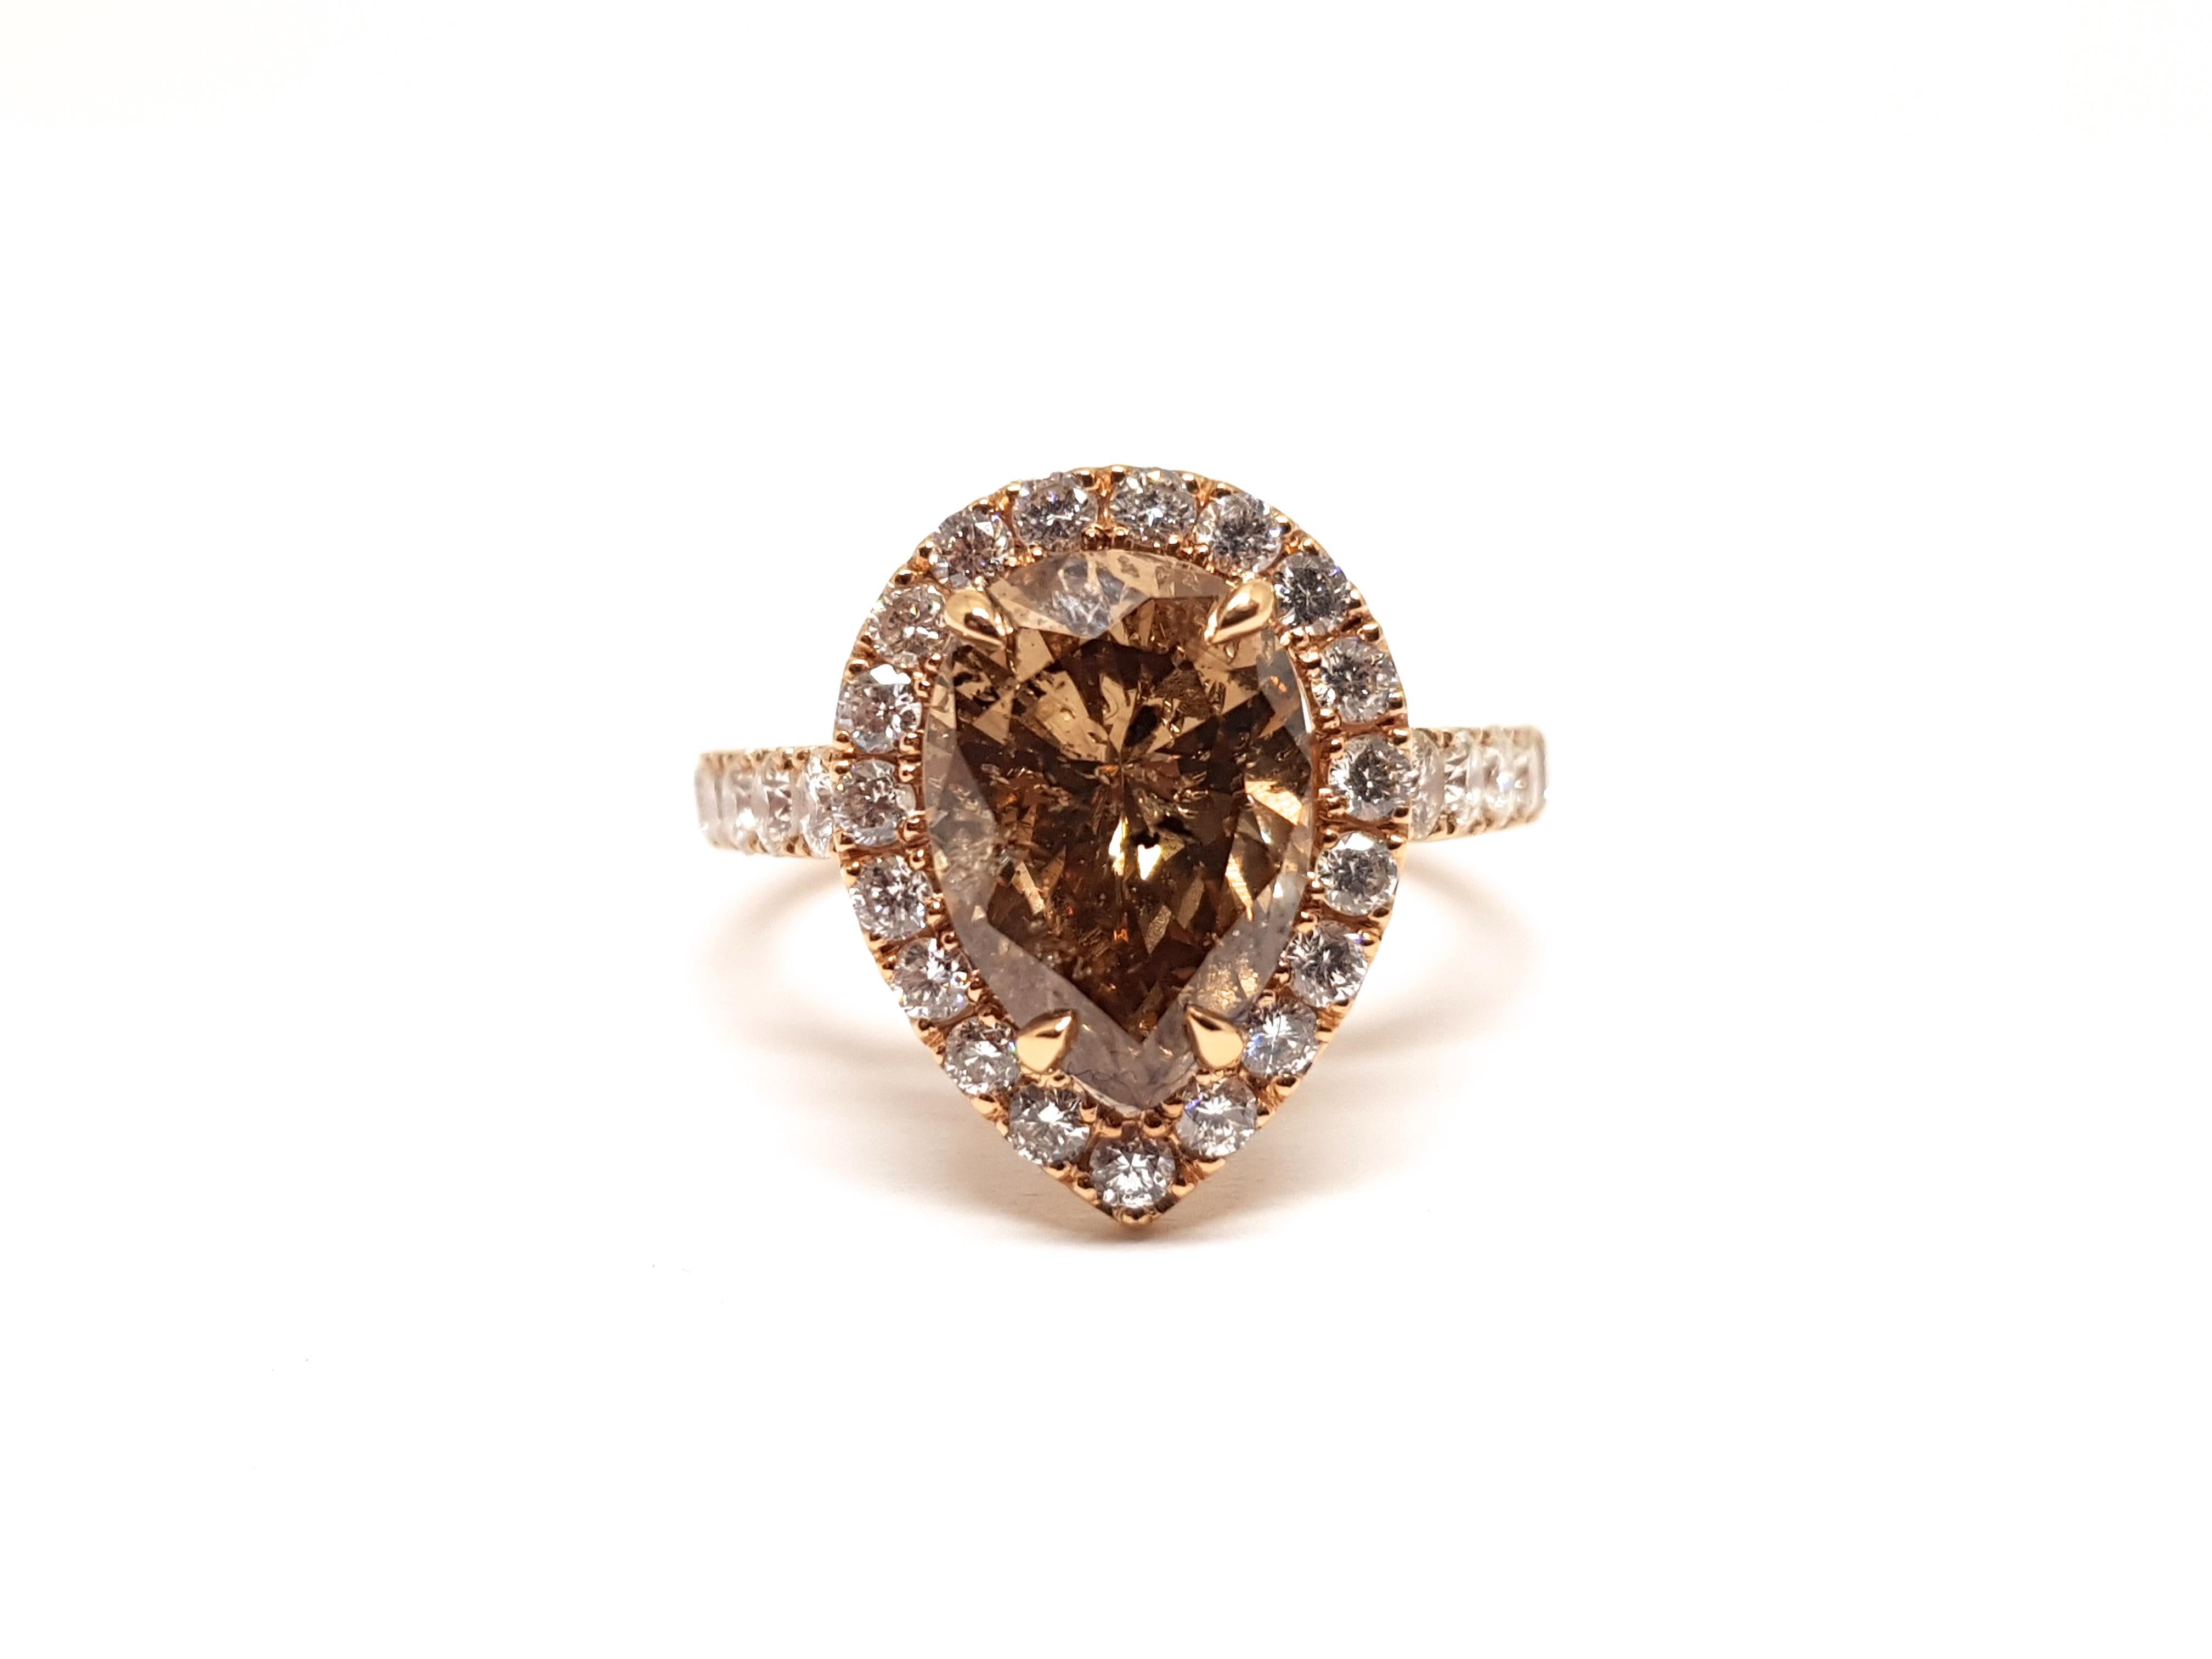 Gold: 18 carat pink rose gold 
Weight: 6.29 grams 
Center Diamond: 2.76 ct. Fancy Brown / SI2
Accent Diamonds: 1.00ct. F / VS2
Ringsize: US 6.75 / Euro 54 / 17.25
Free resizing of Ring up to size 70 / 22mm / US 13 
Width: 1.6 cm 
All our jewellery